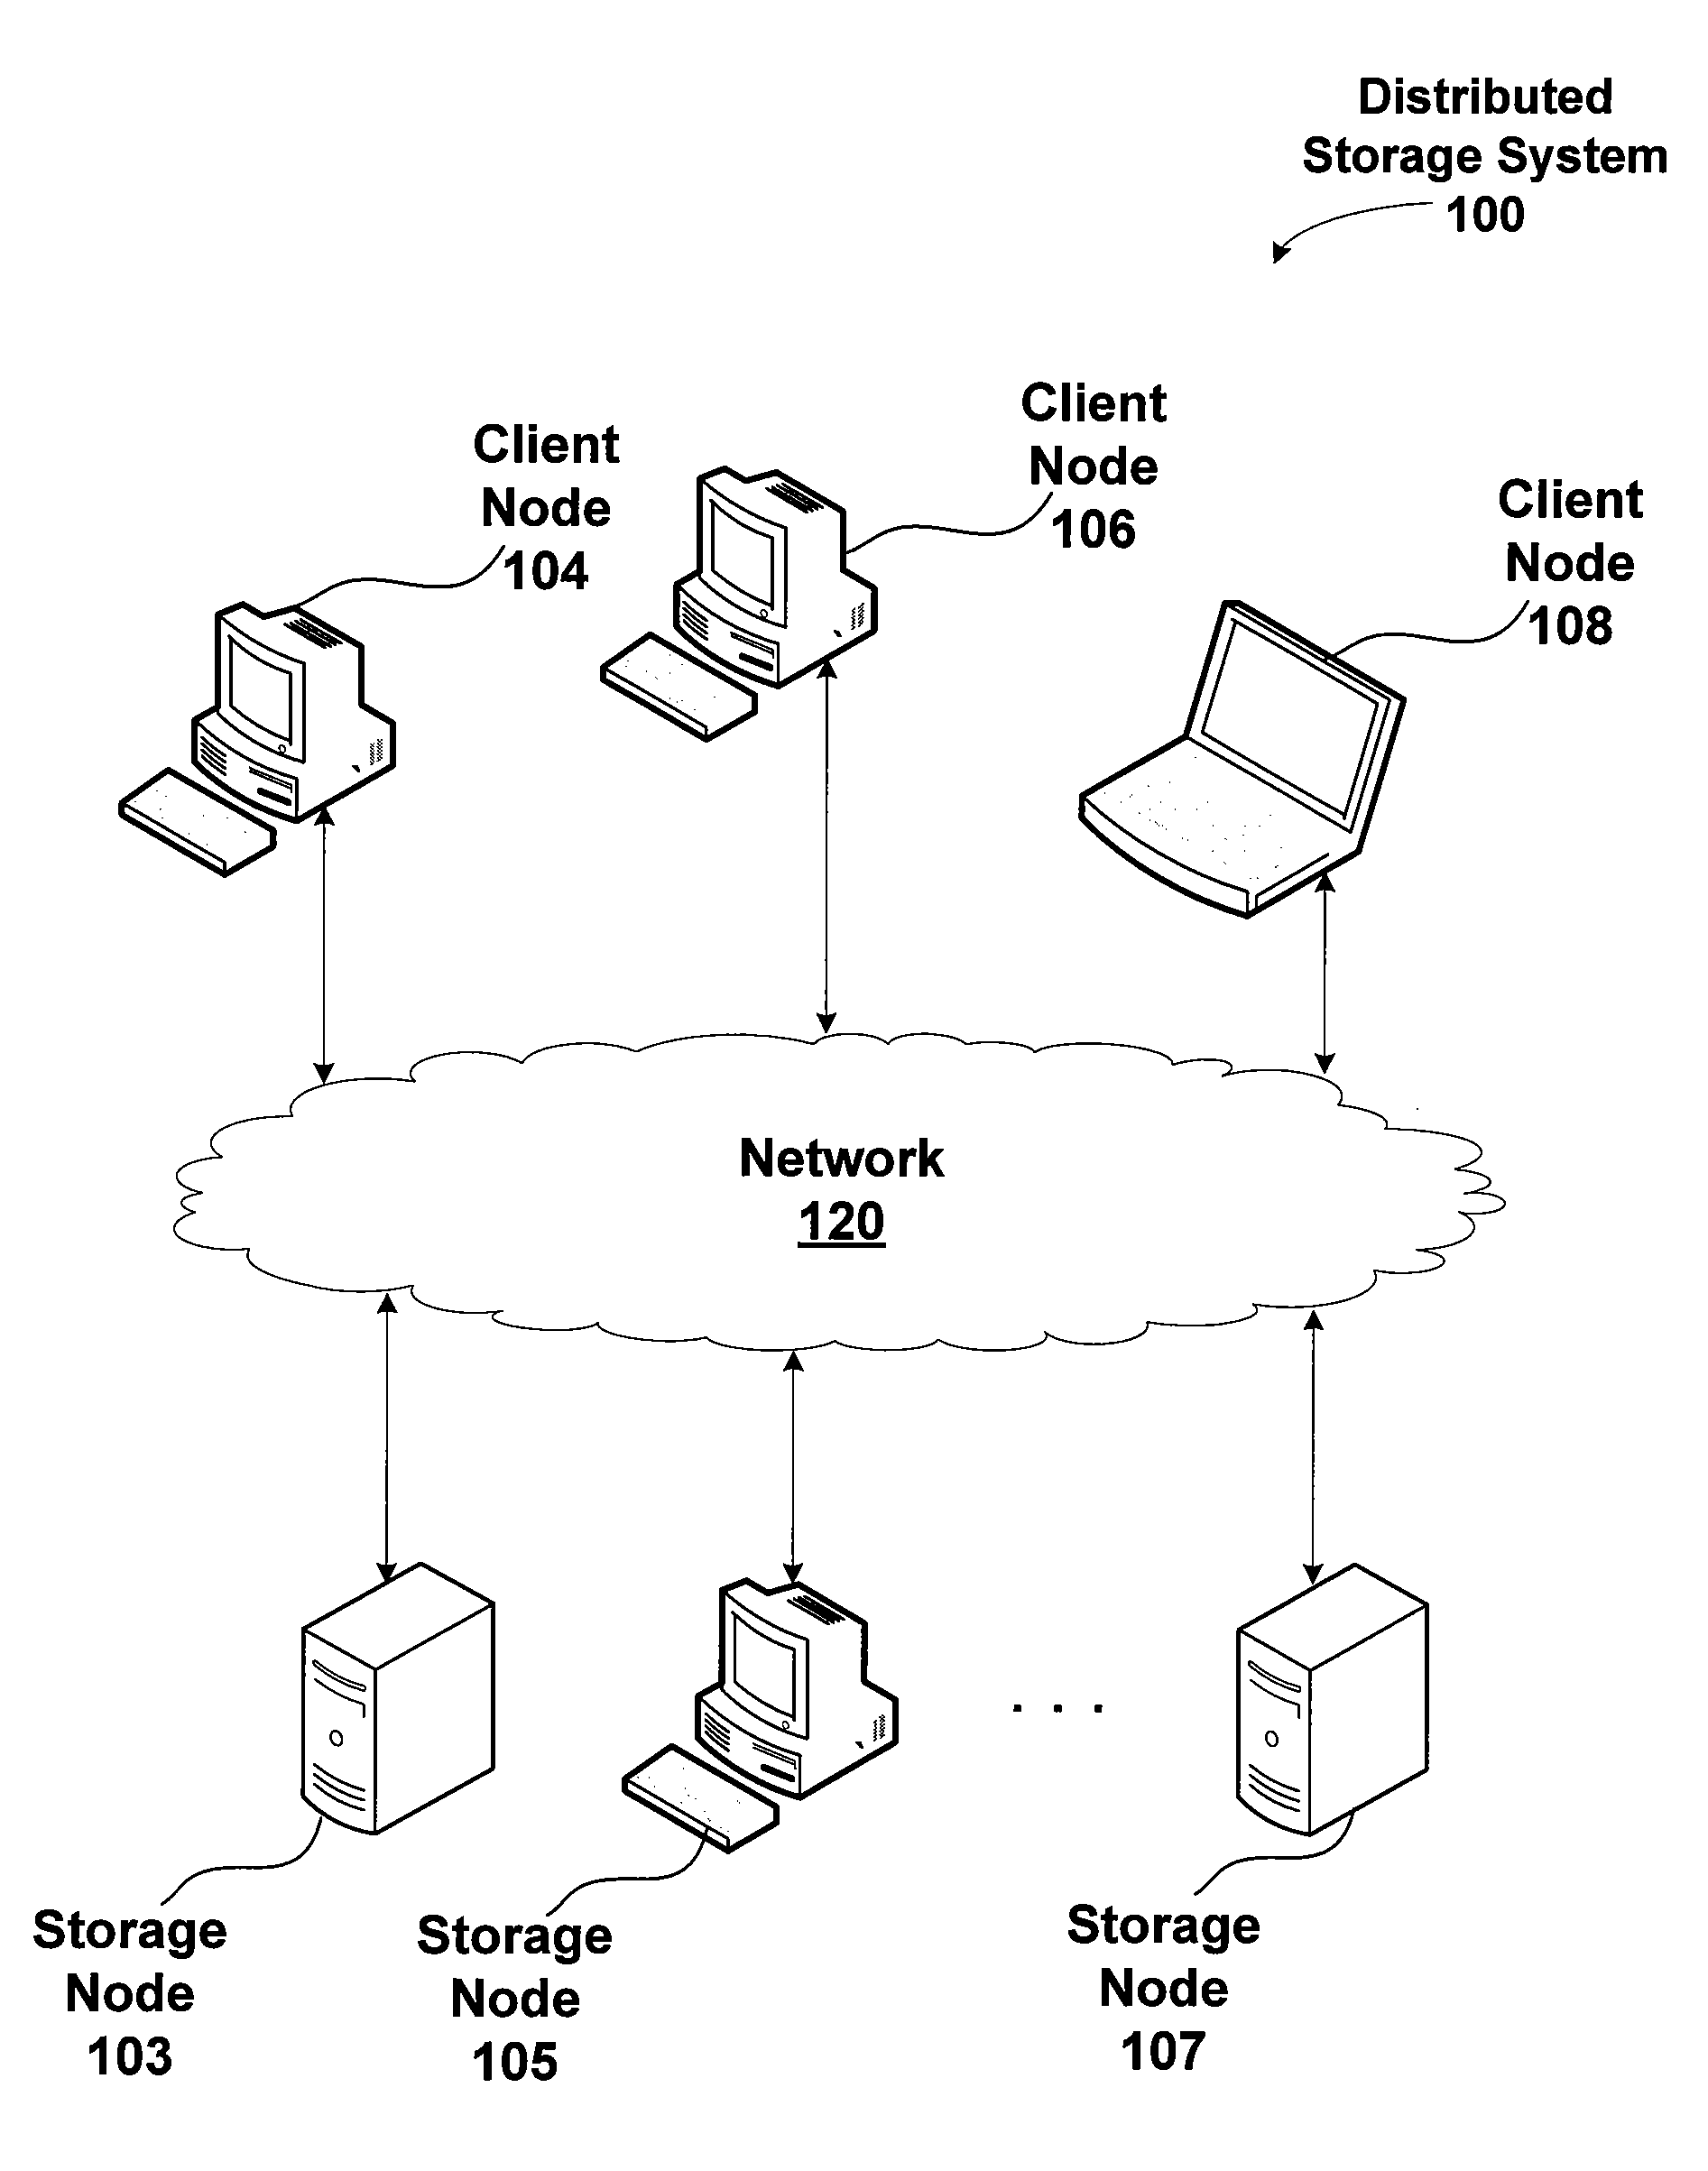 System and method for distributing and accessing files in a distributed storage system